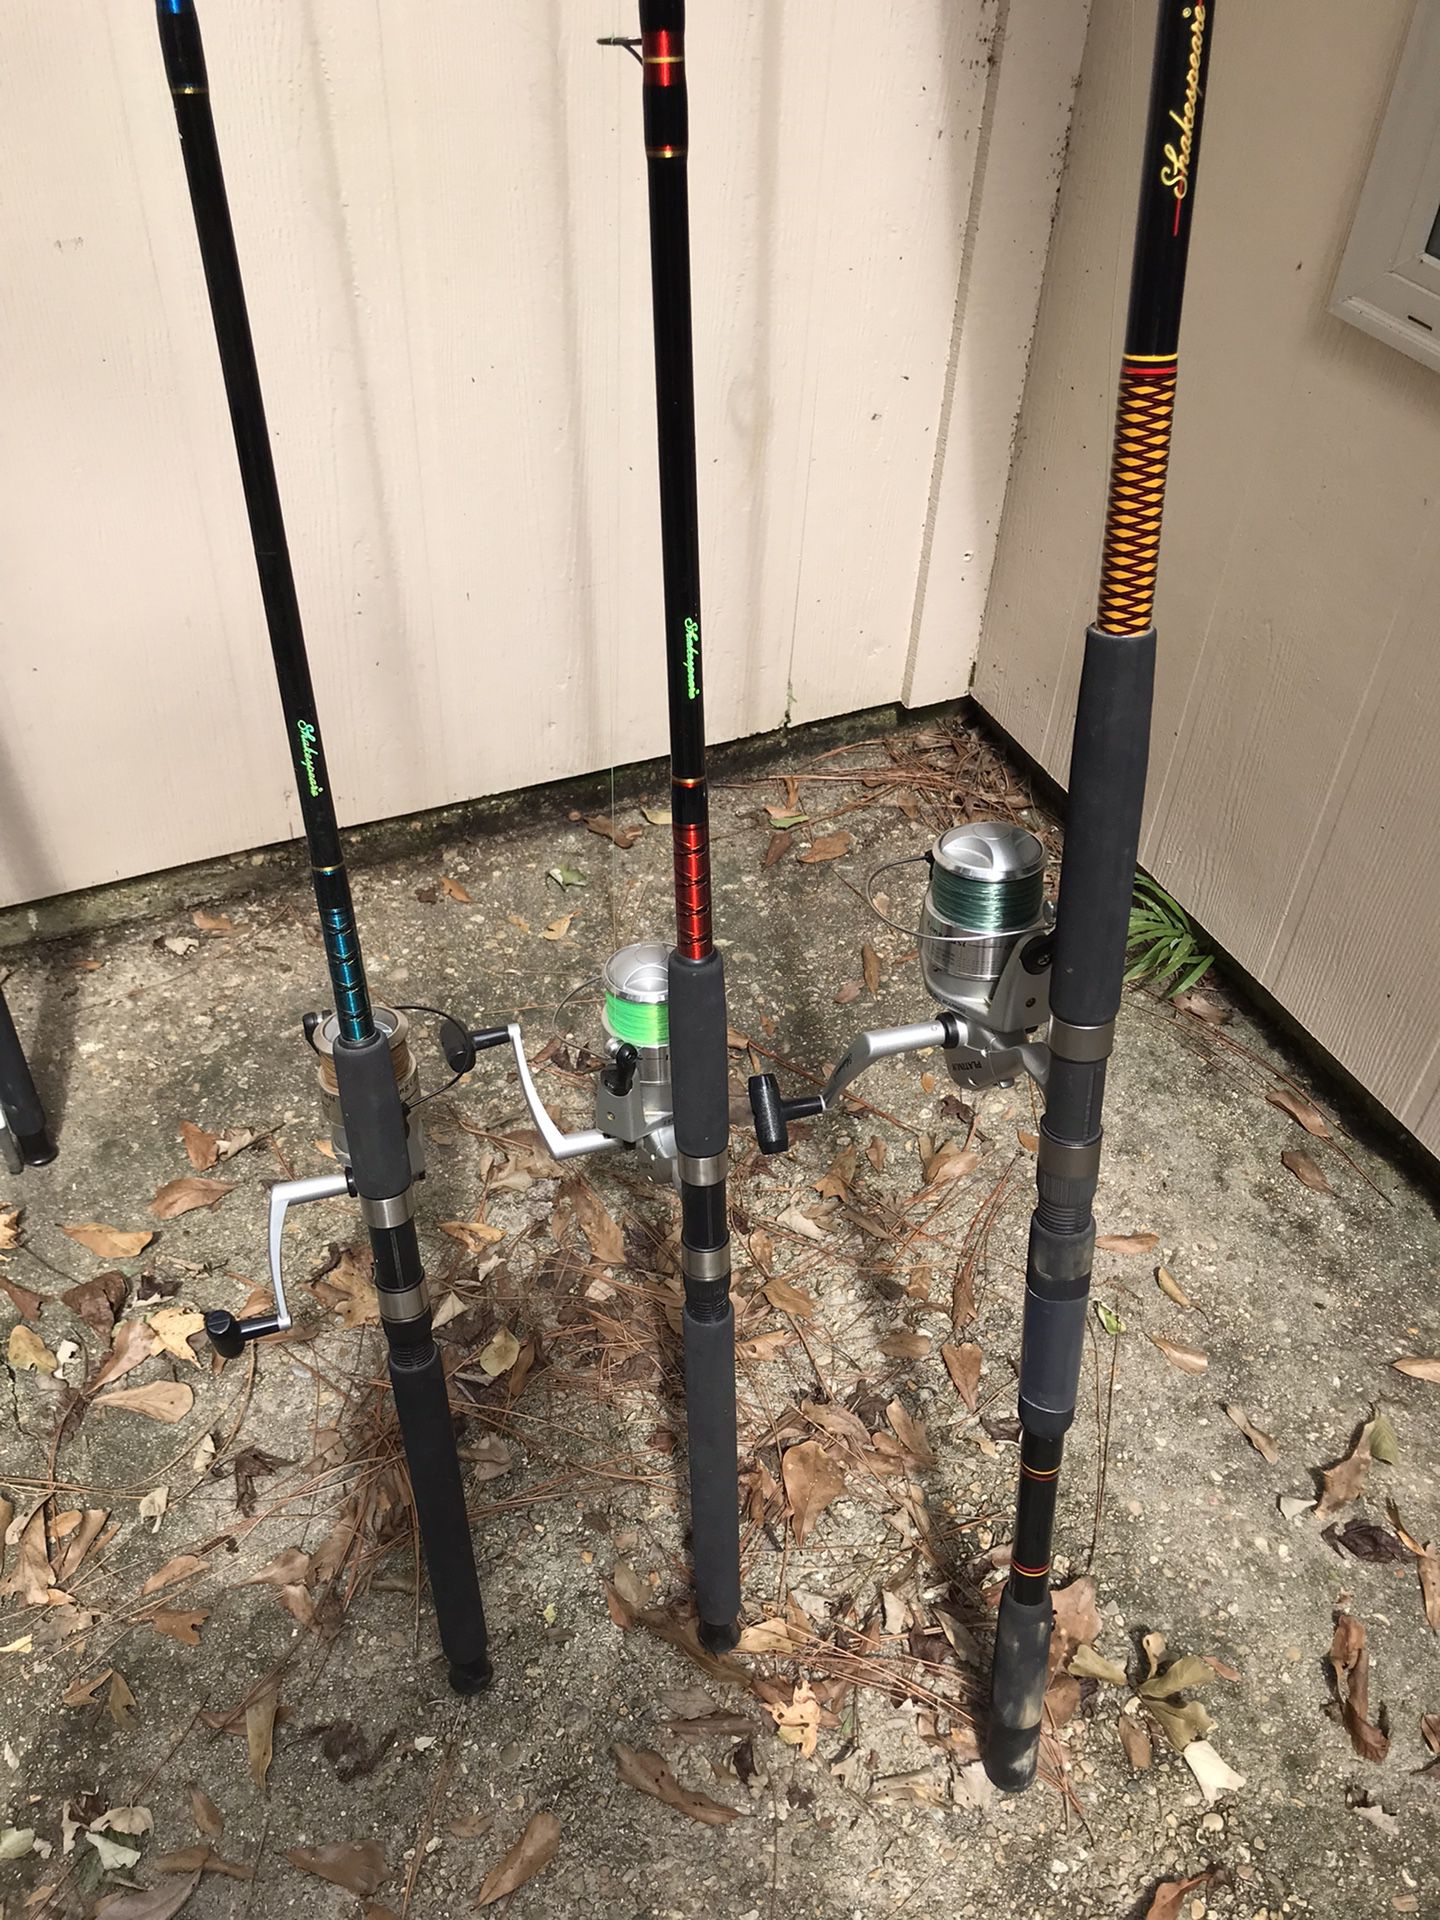 Surf Rods Price $200 for all 3 